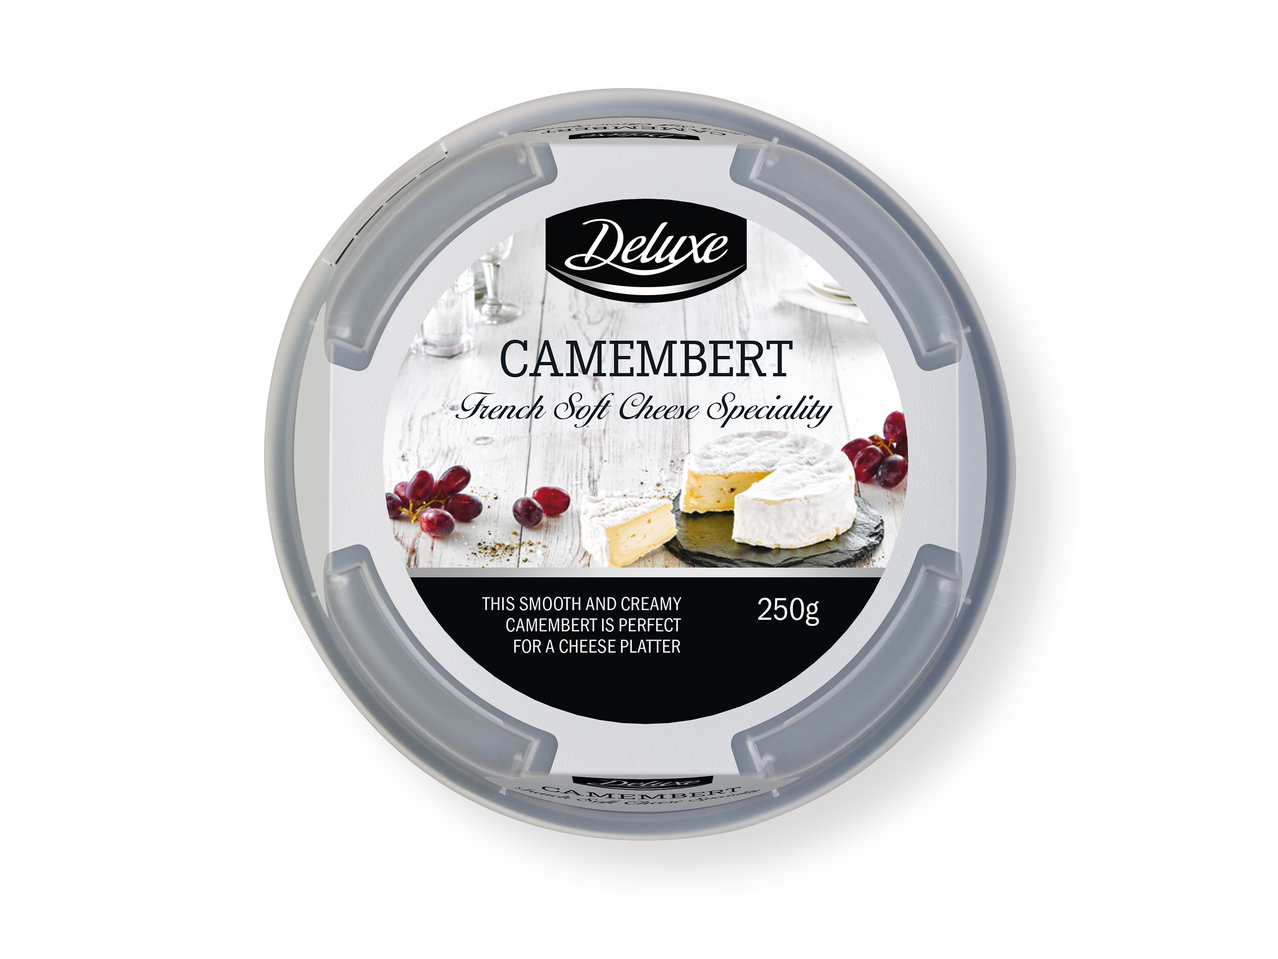 'Deluxe(R)' Queso Camembert